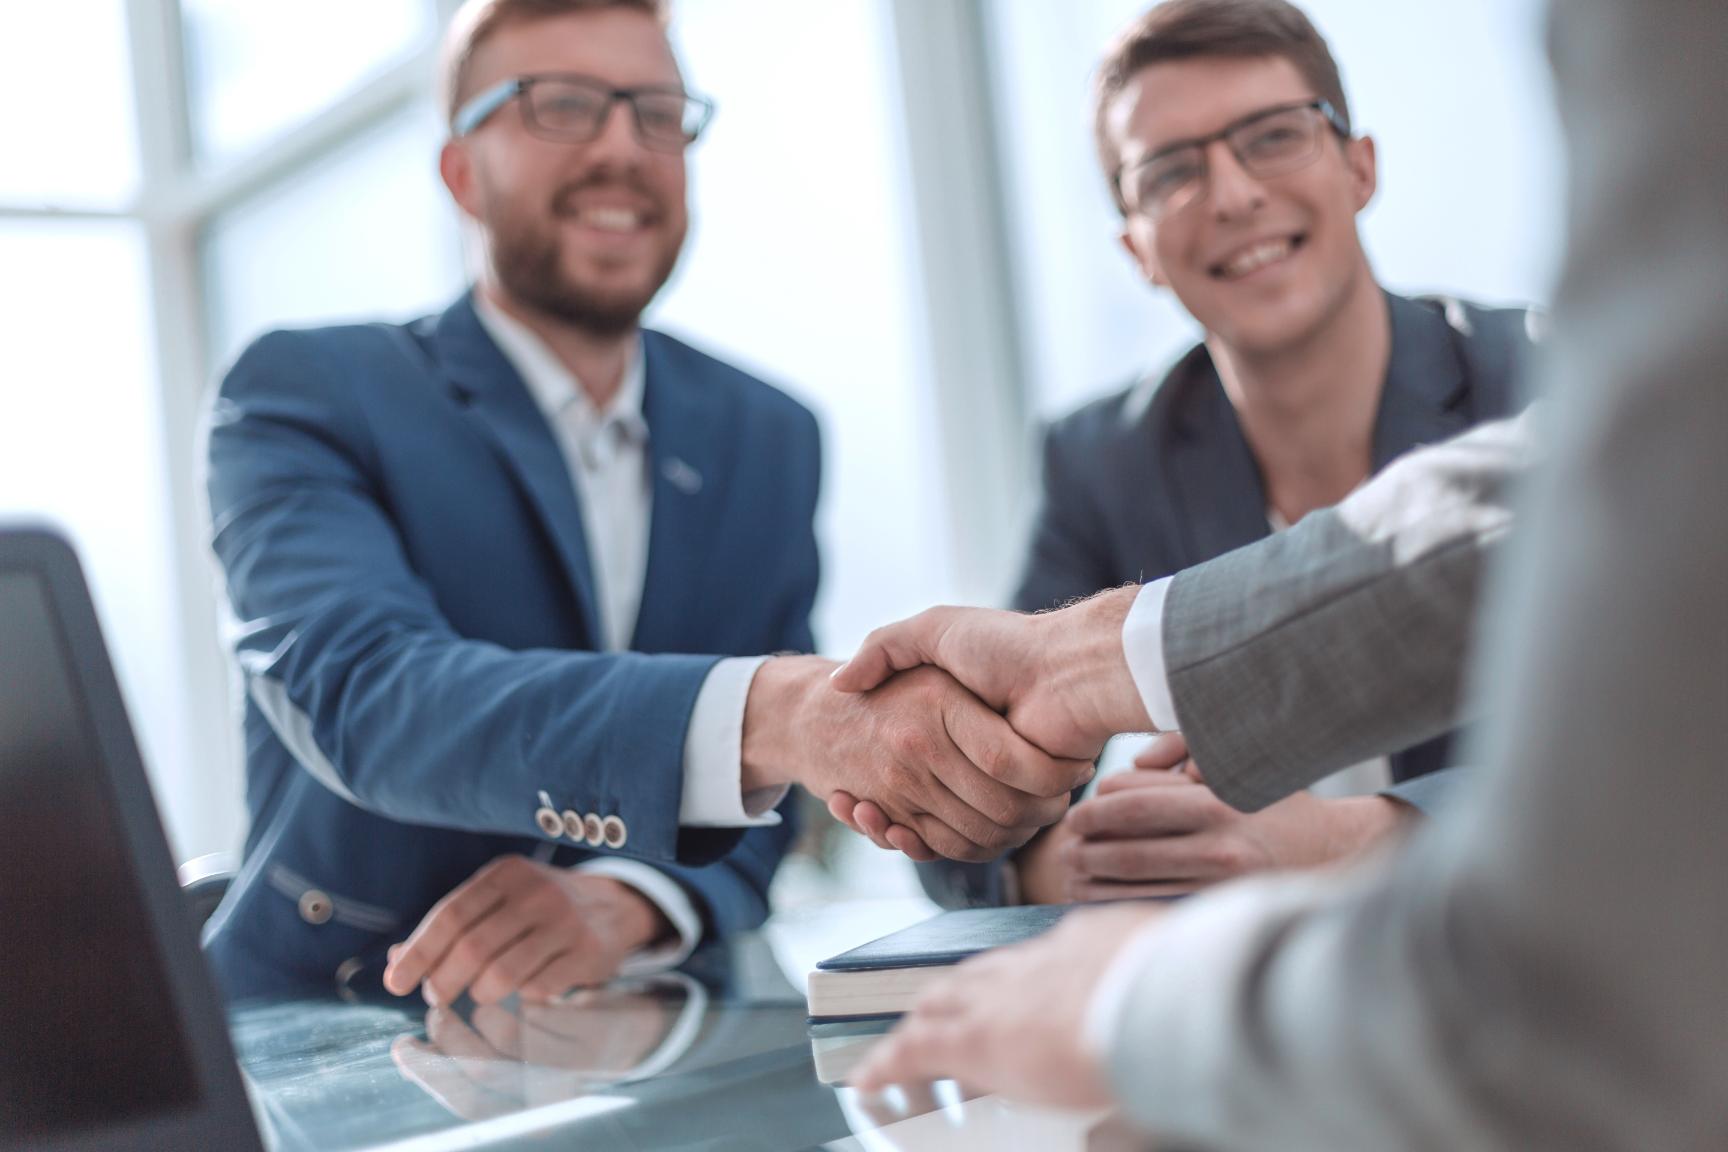 Client and representative shaking hands at a conference table